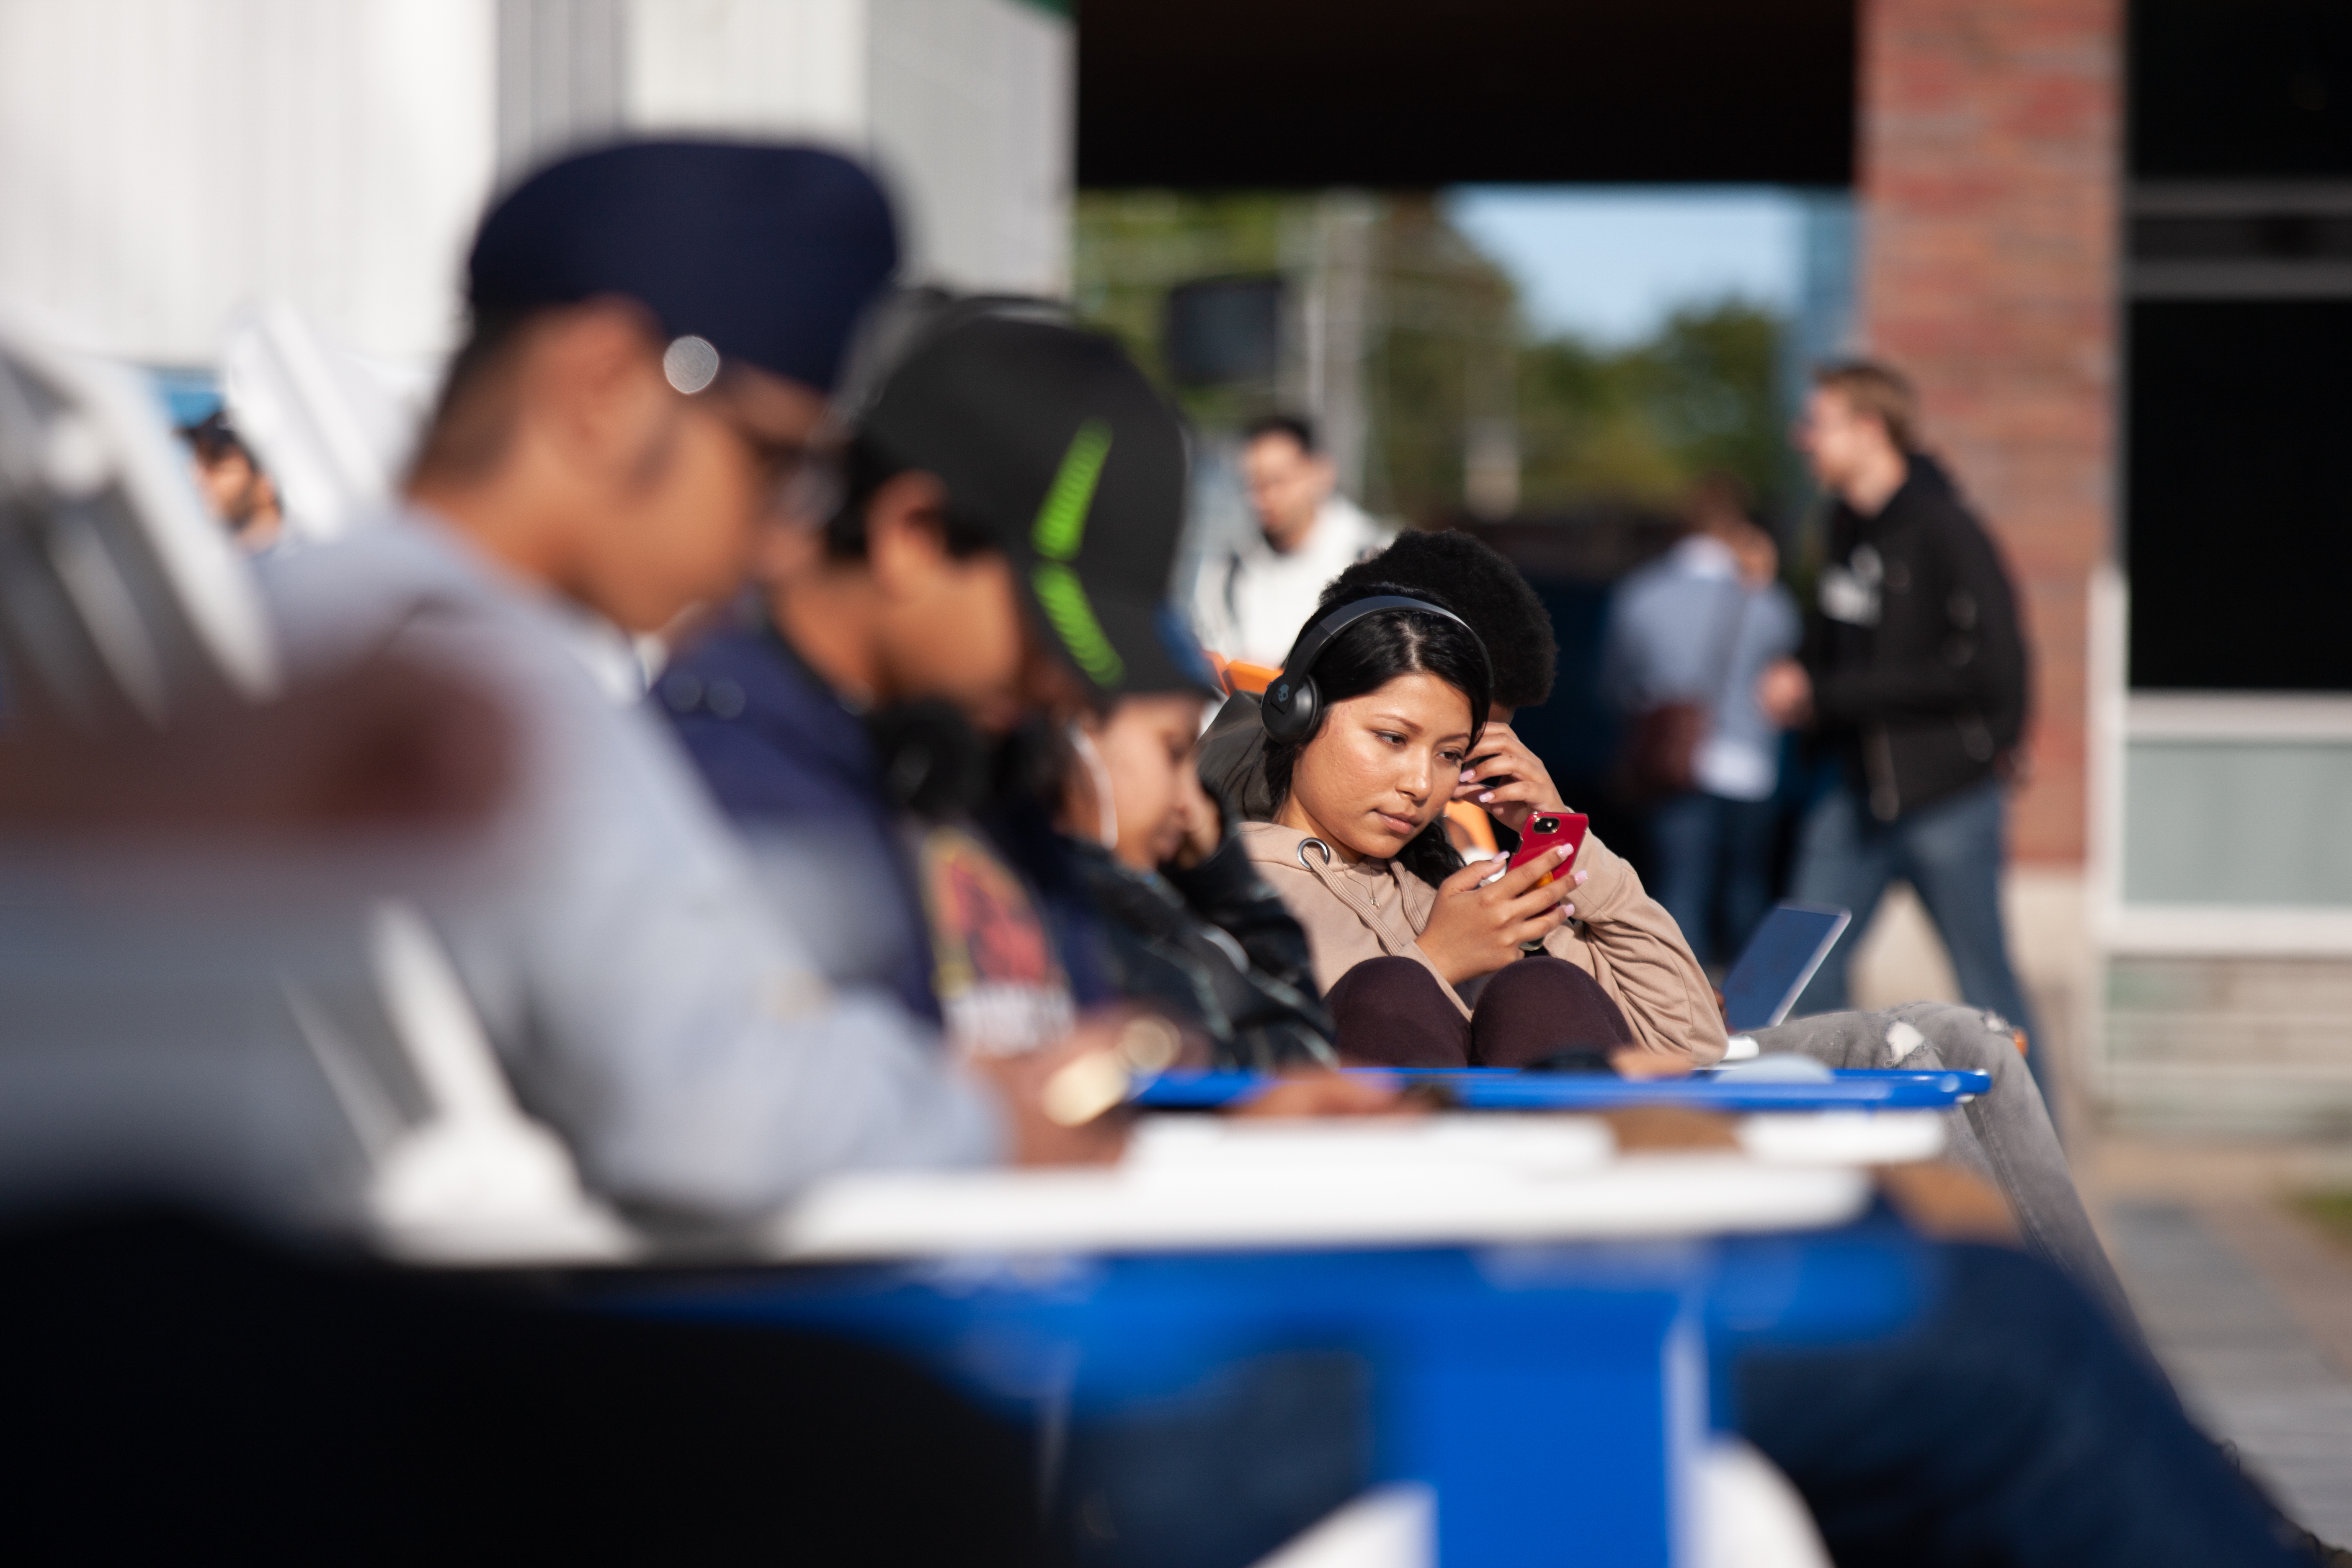 an individual sitting down looking at their phone, the photo has students surround blurred.